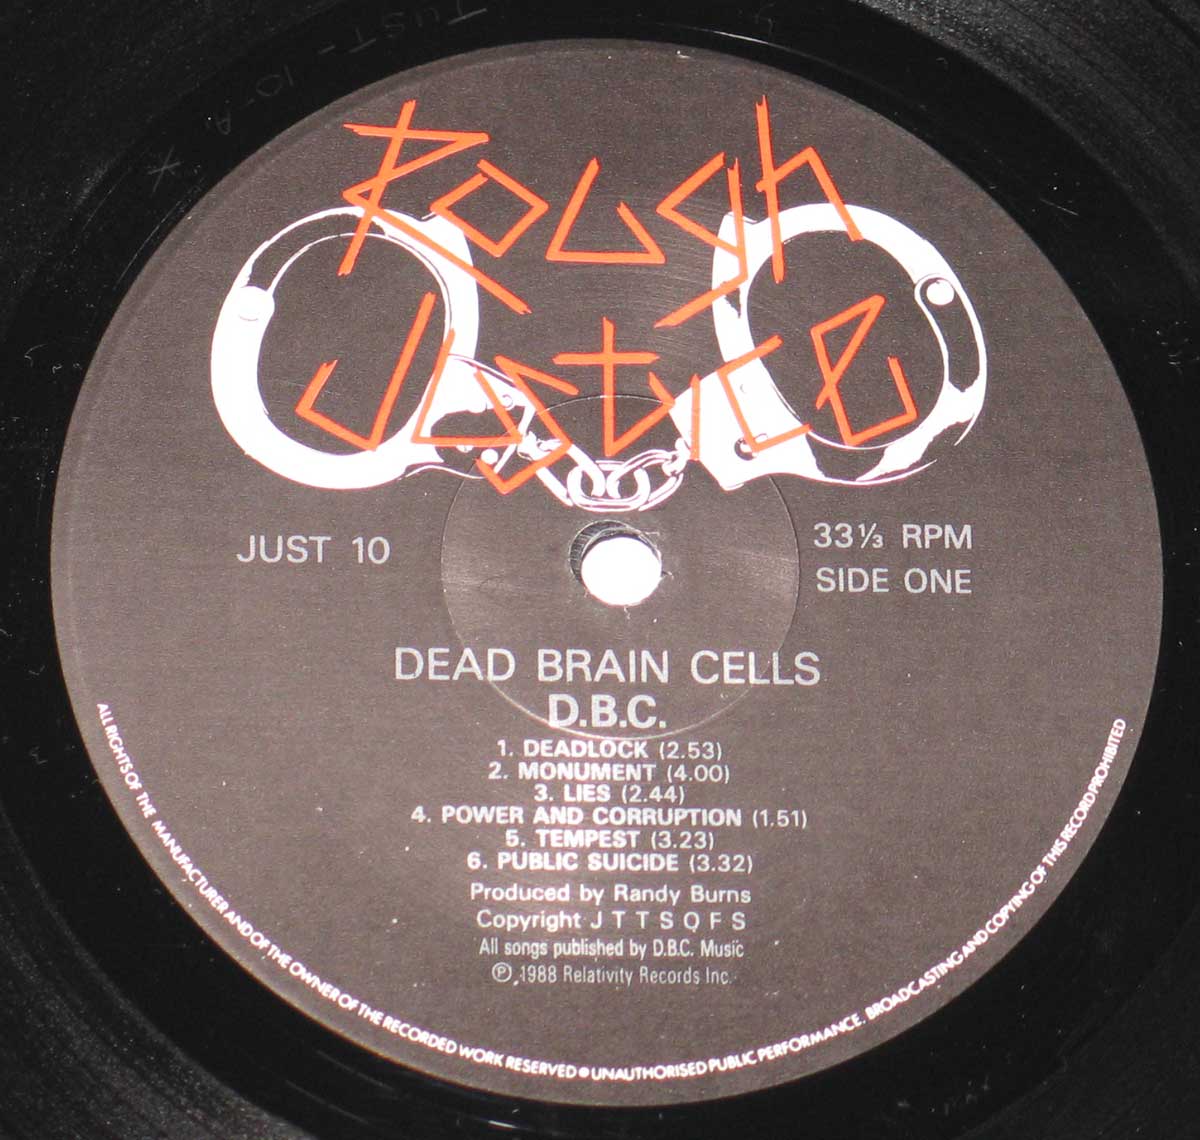 Close up of the DBC Dead Brain Cells - Self-Titled record's label 